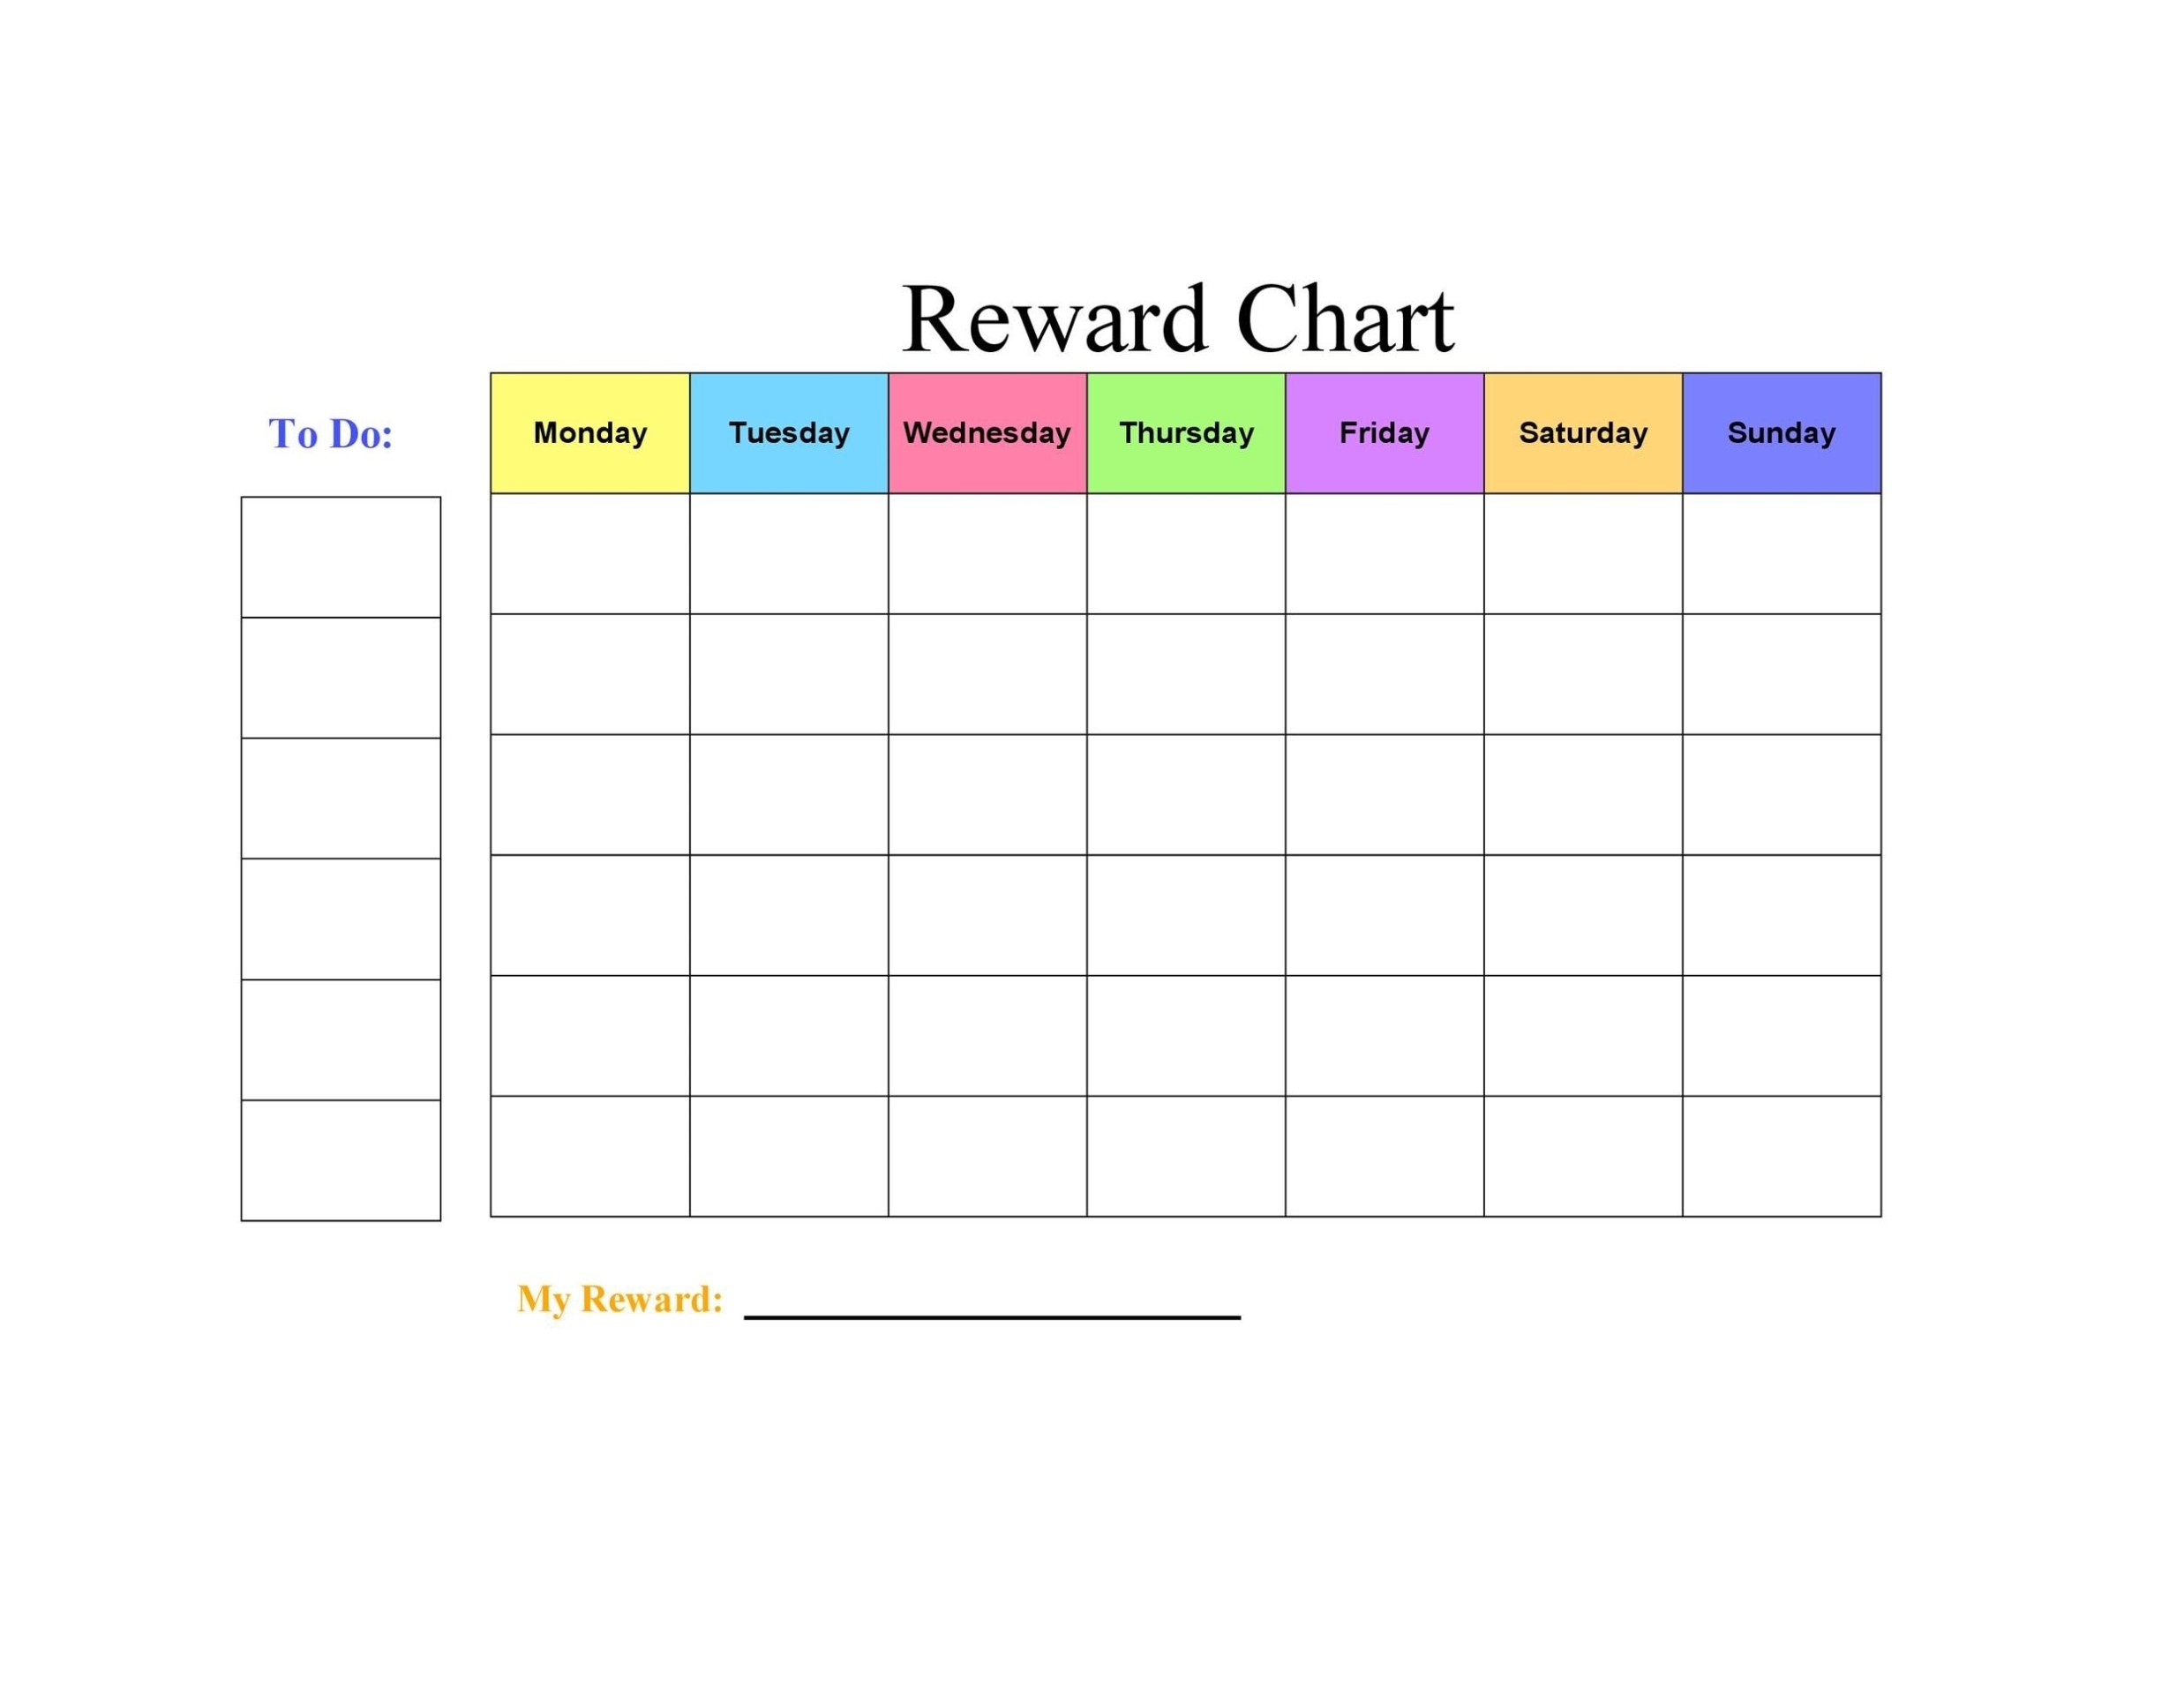 How To Download Free Chart For Monday Friday | Get Your Calendar Printable Within Blank Reward Chart Template